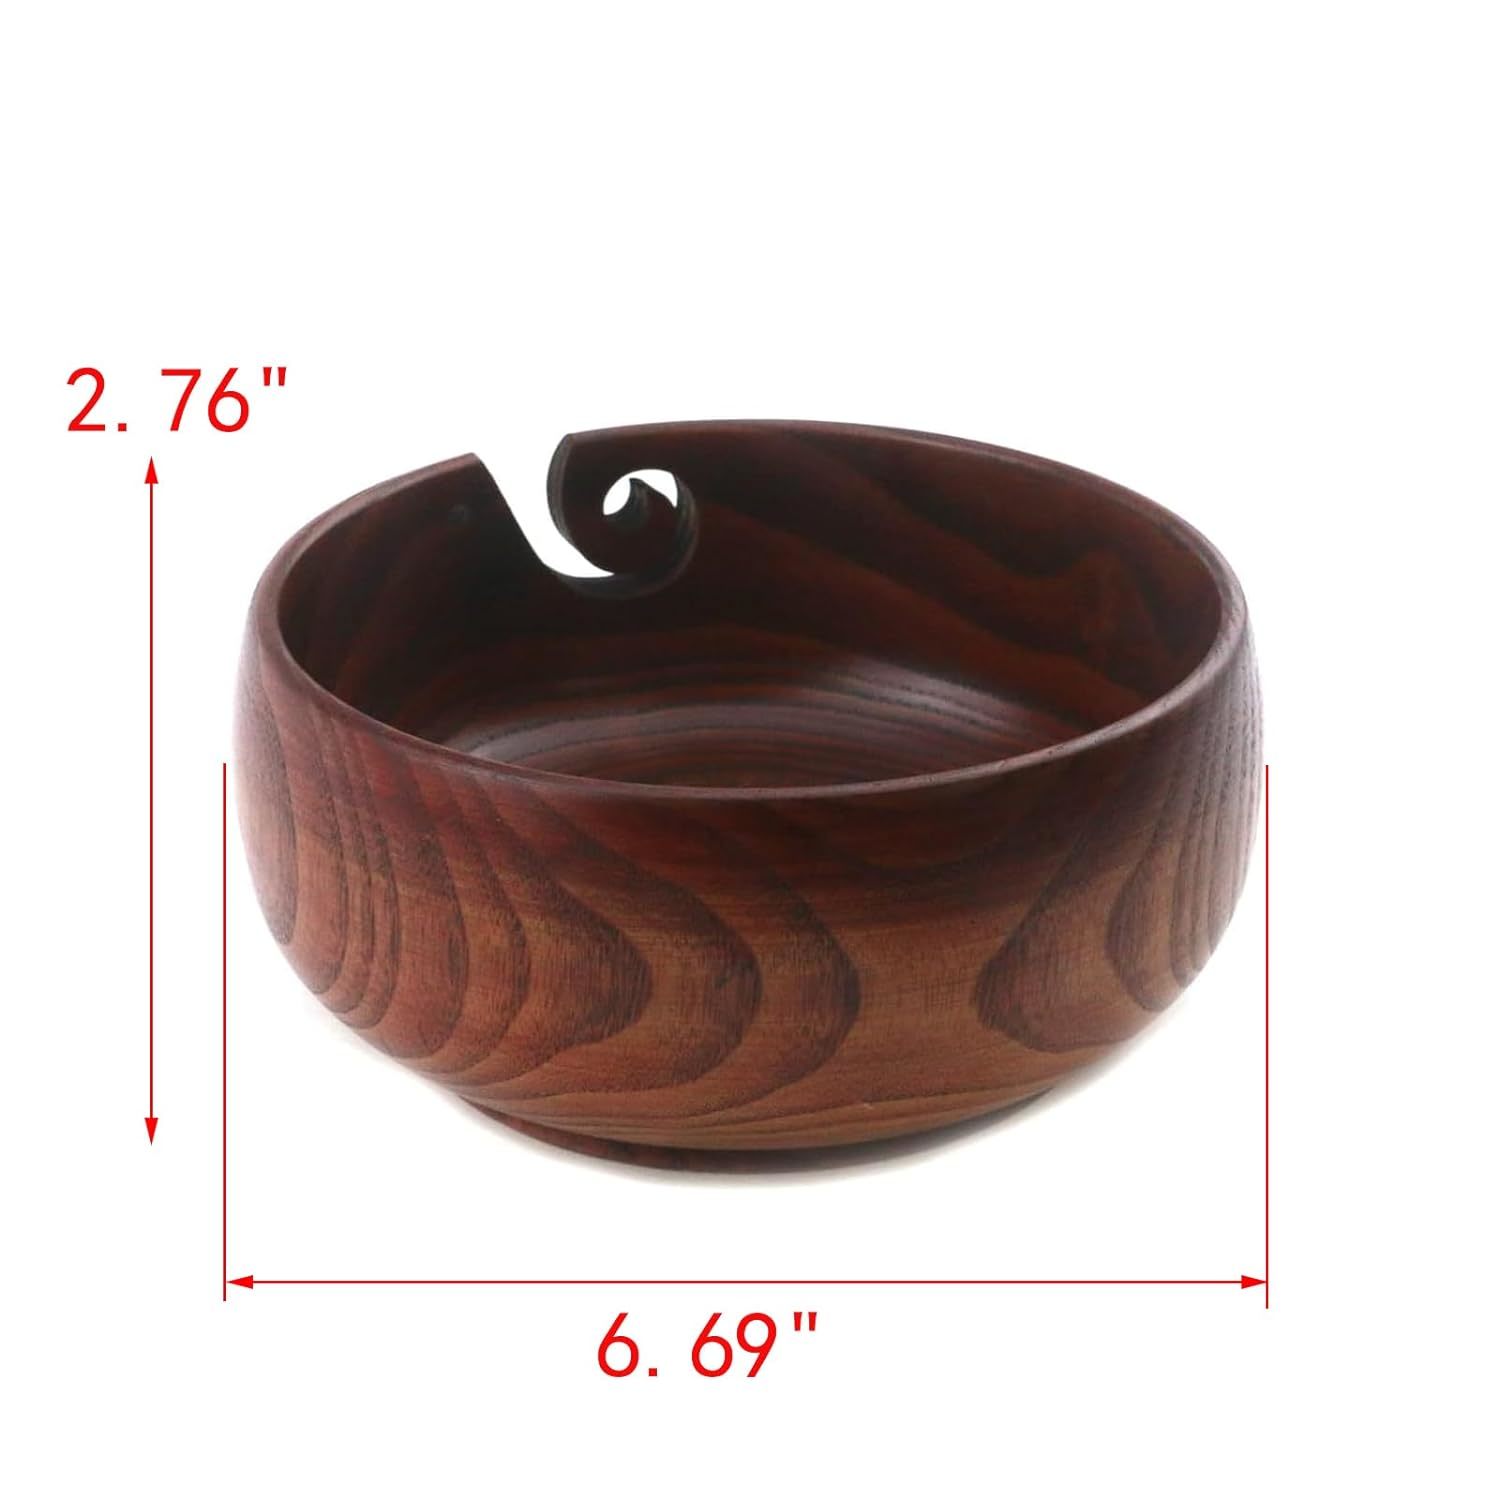 Wooden Yarn Bowl, 6 X 3 Inches Knitting Yarn Bowls with Holes